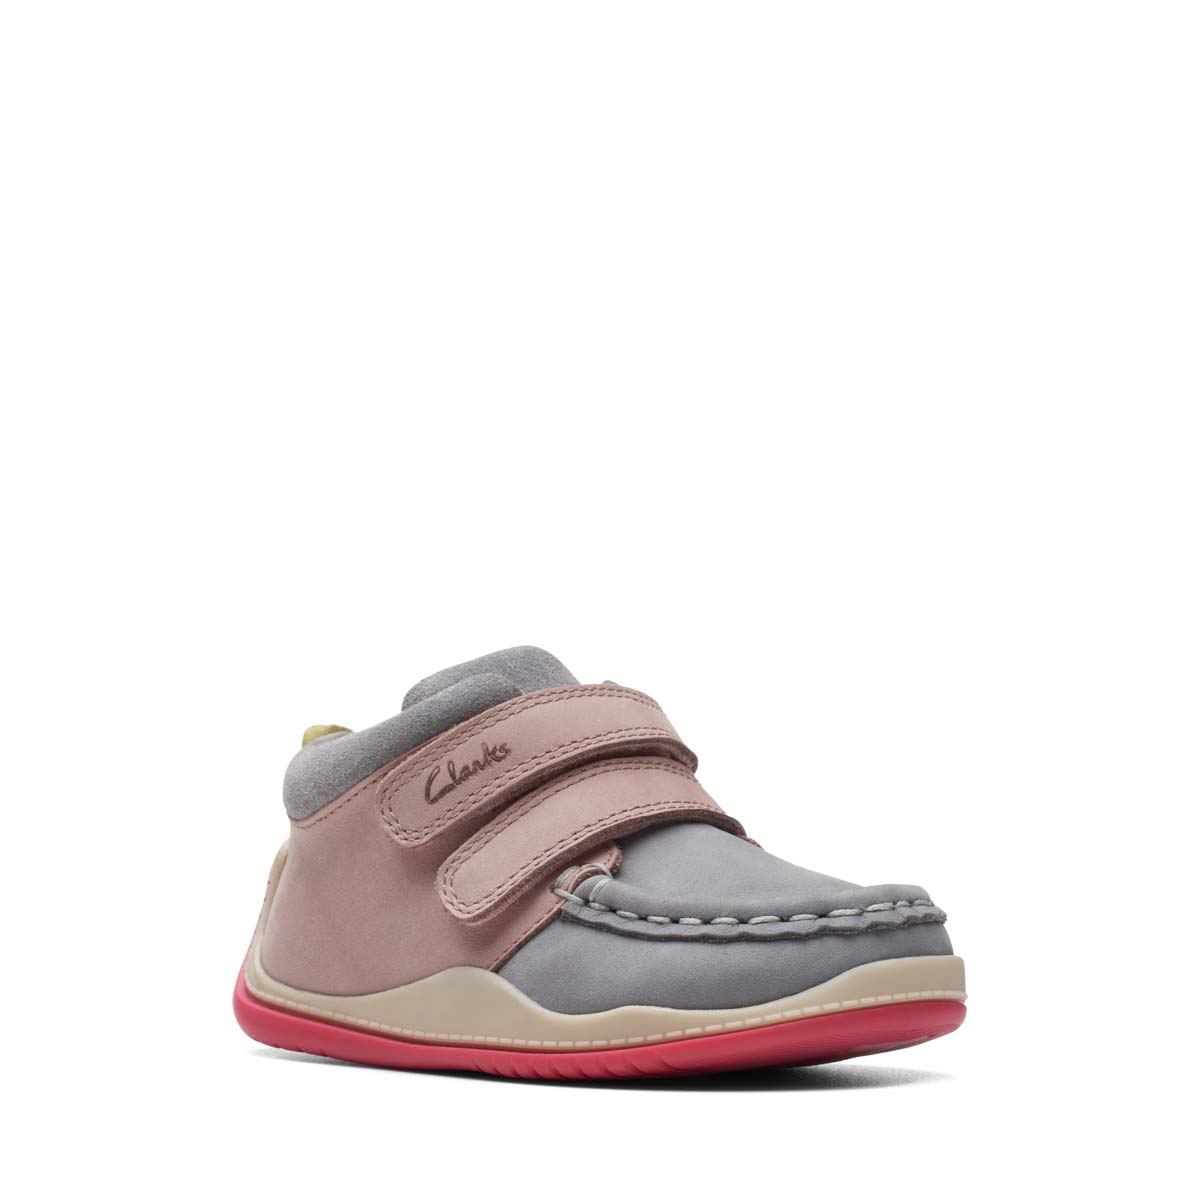 Clarks Noodle Play 2v Grey Pink Kids Toddler Girls Boots 7531-96F in a Plain Leather in Size 6.5